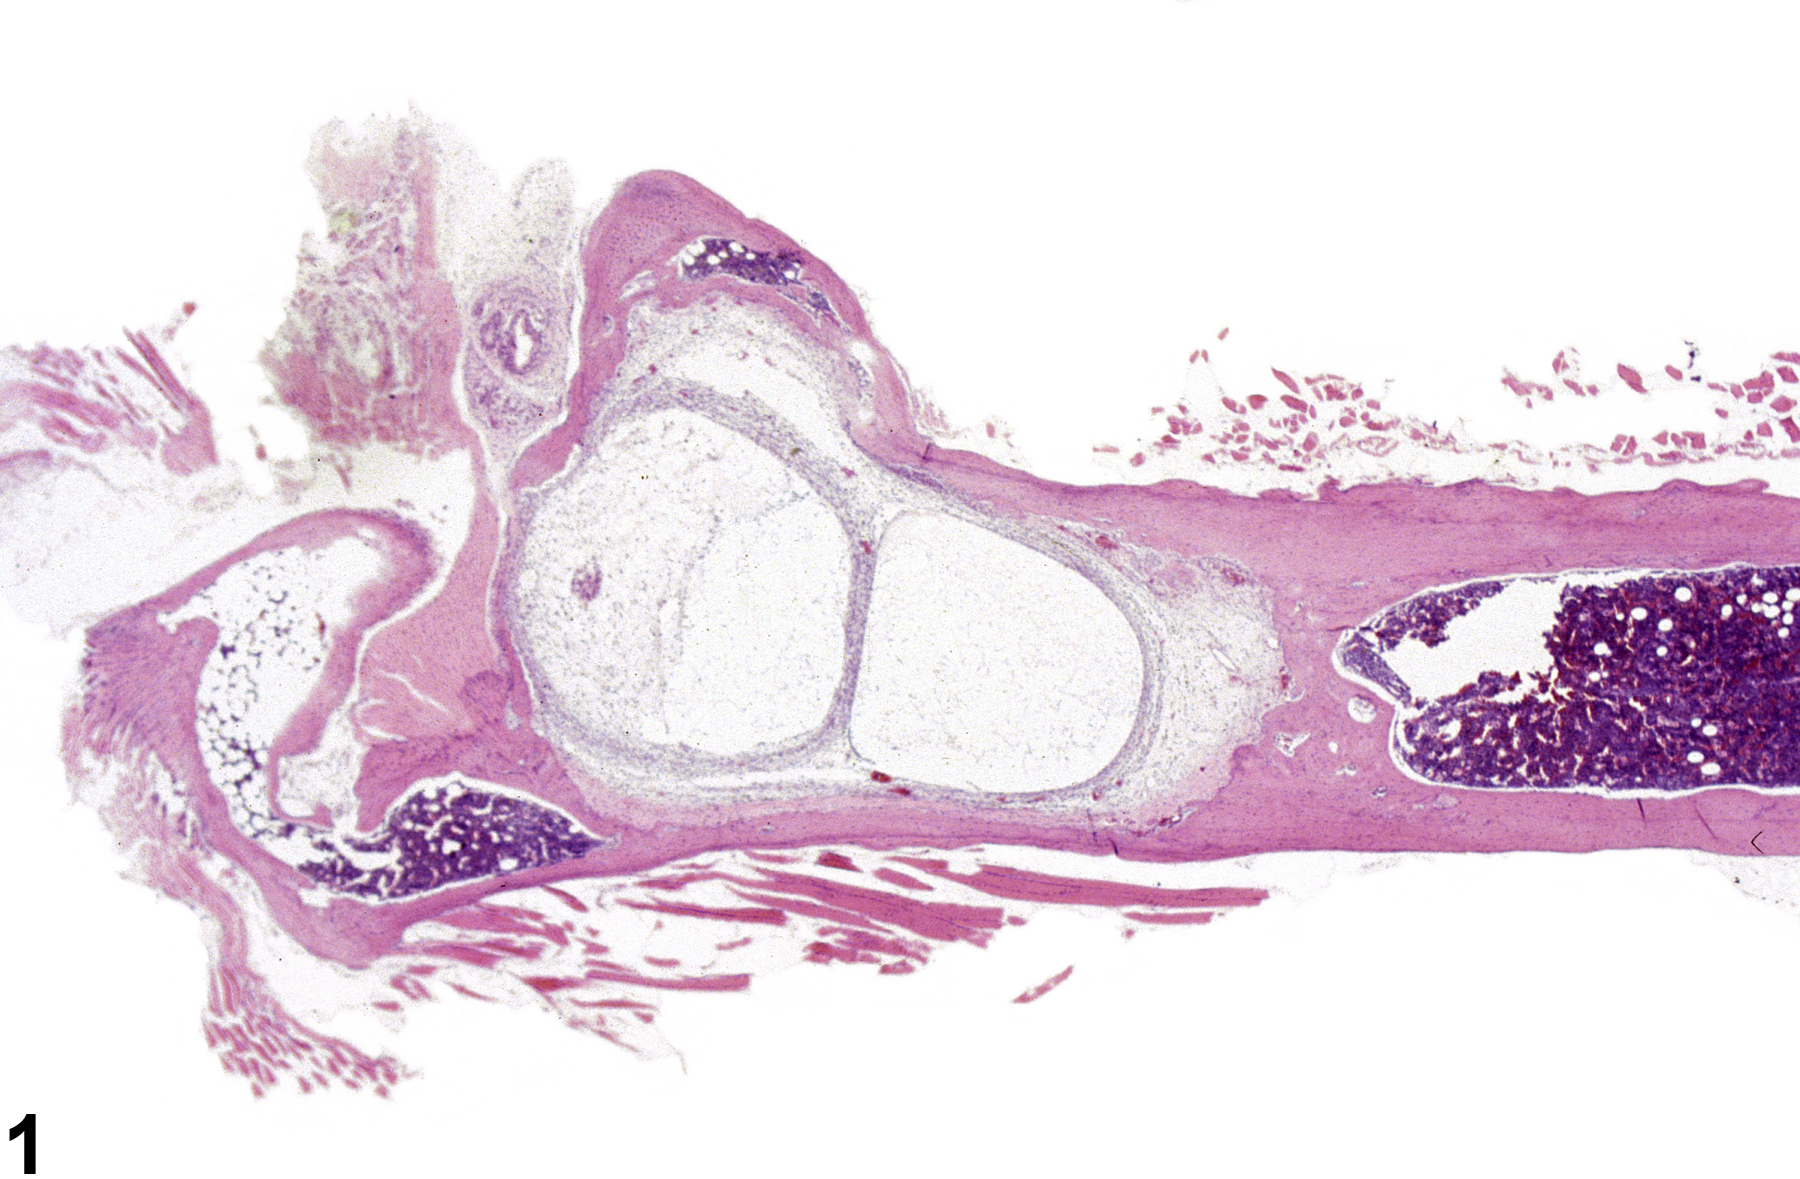 Image of cyst in the bone from a female B6C3F1/N mouse in a chronic study